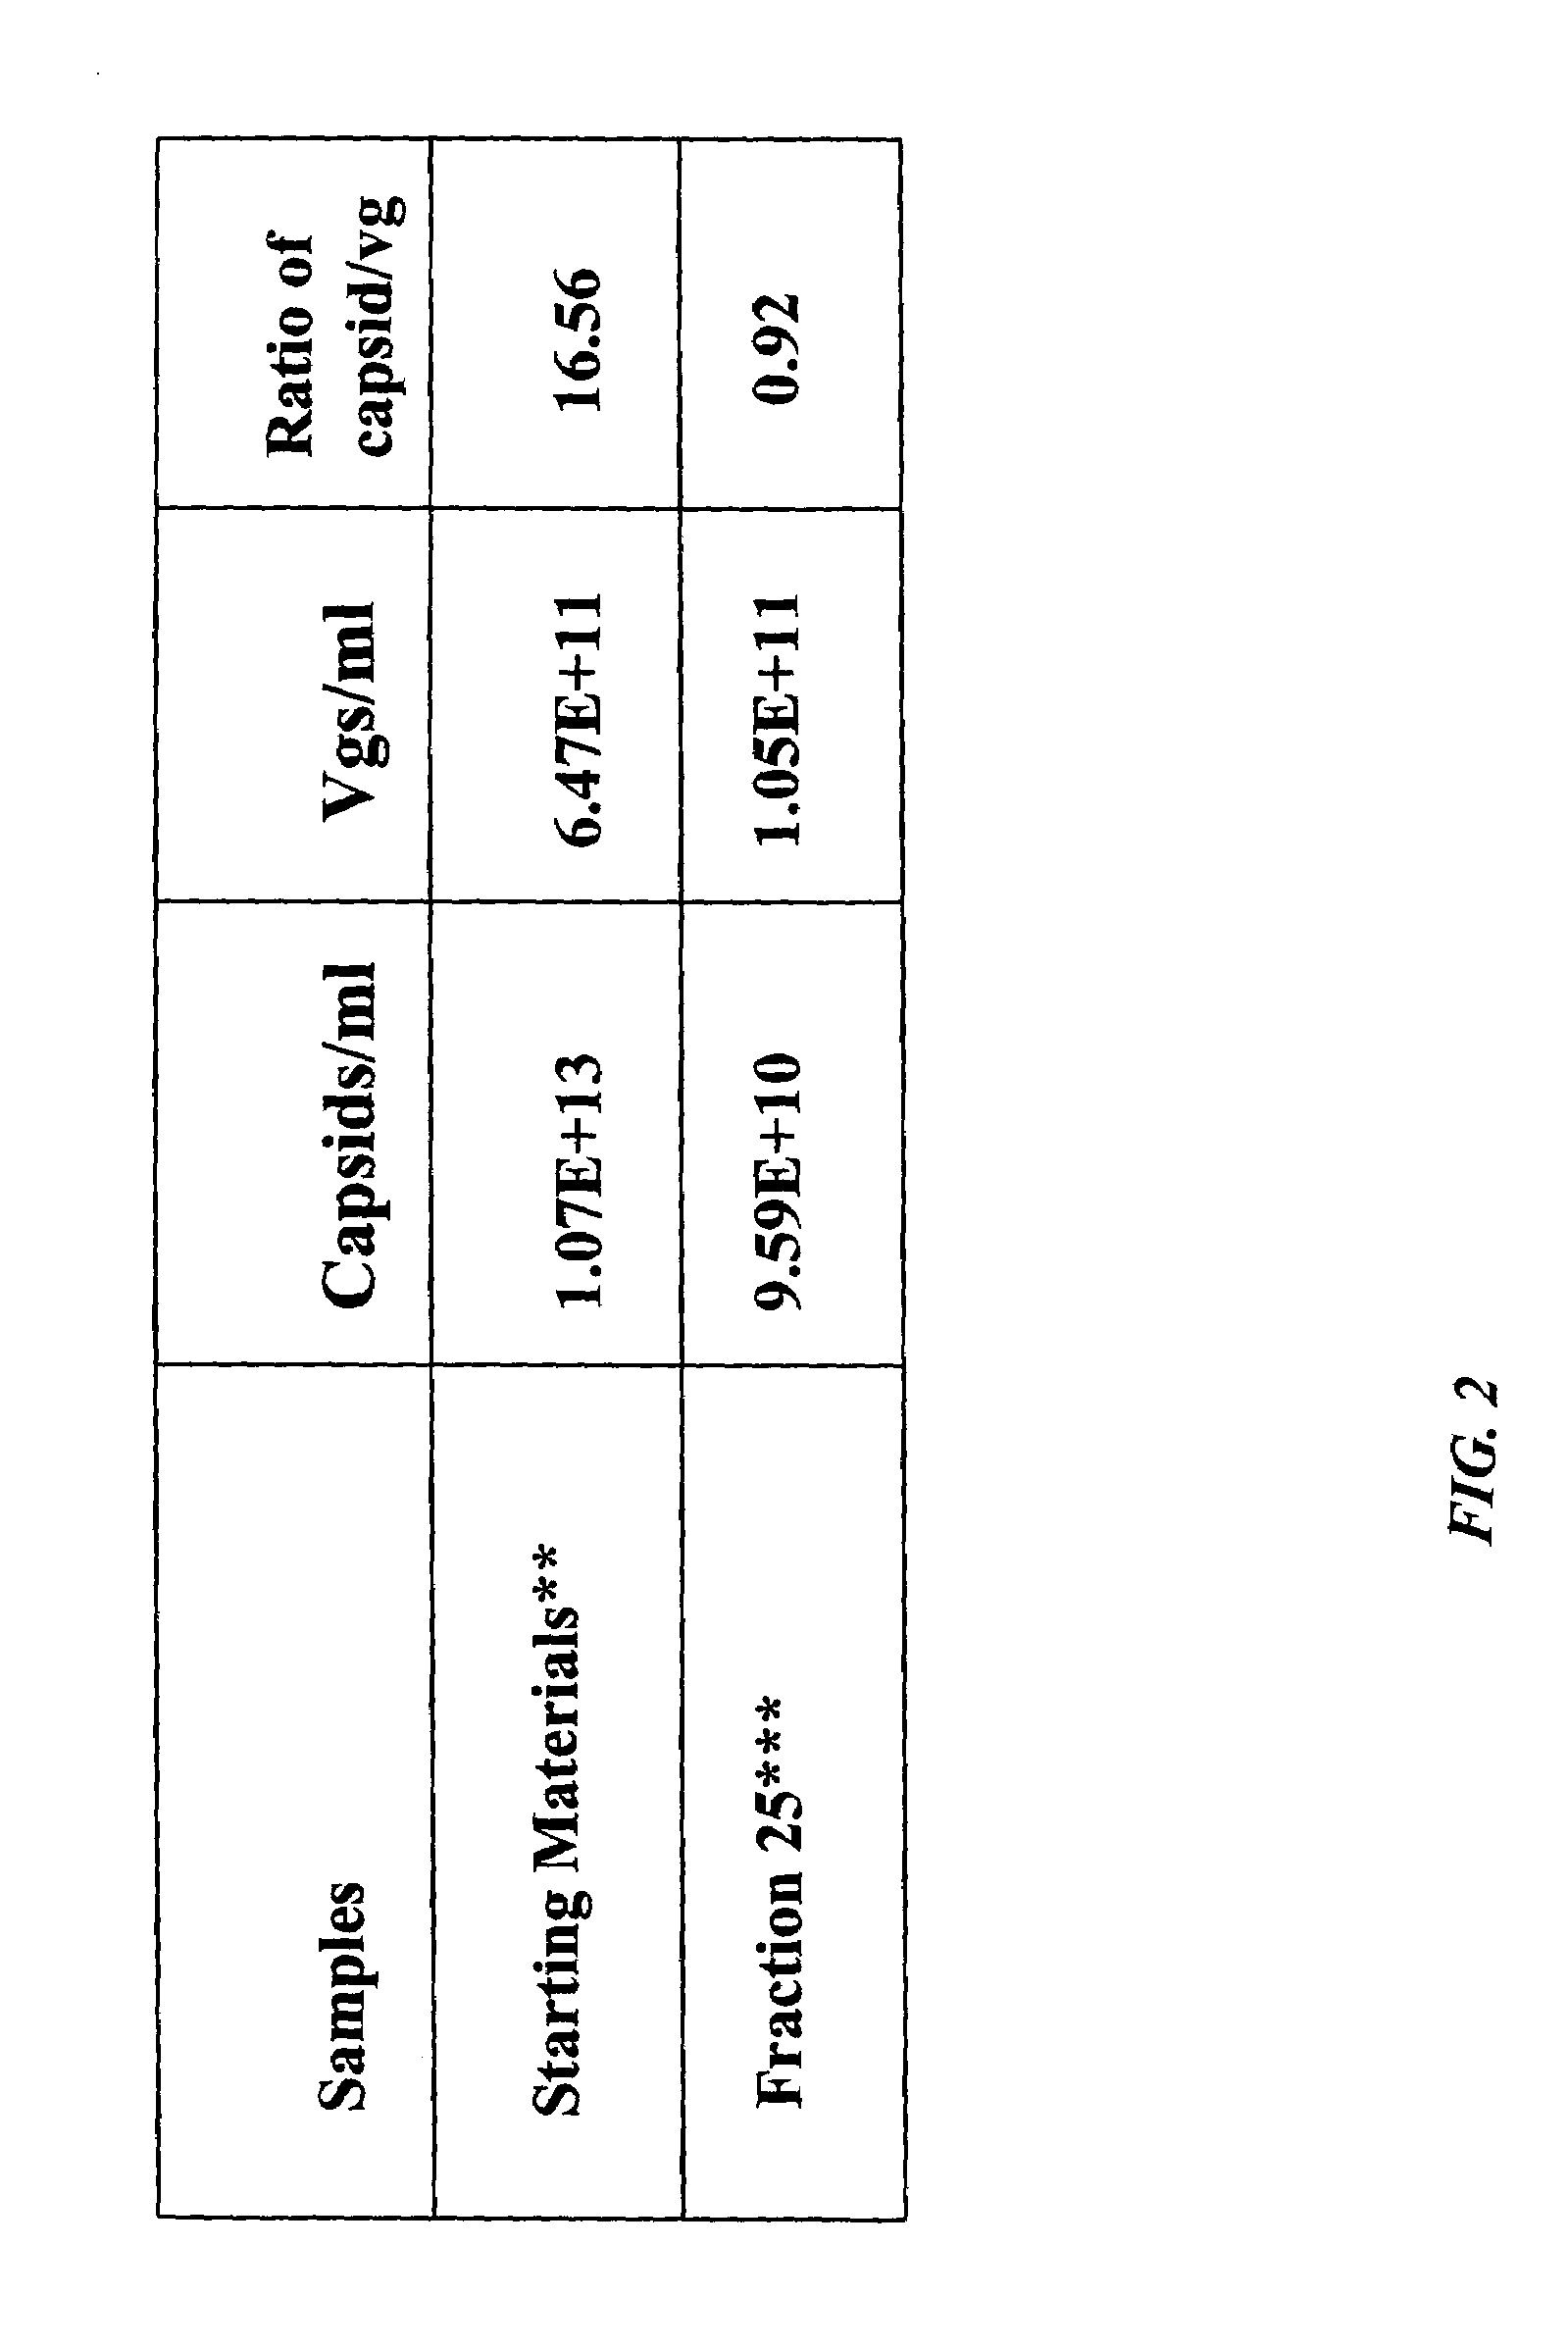 Methods for producing preparations of recombinant AAV virions substantially free of empty capsids